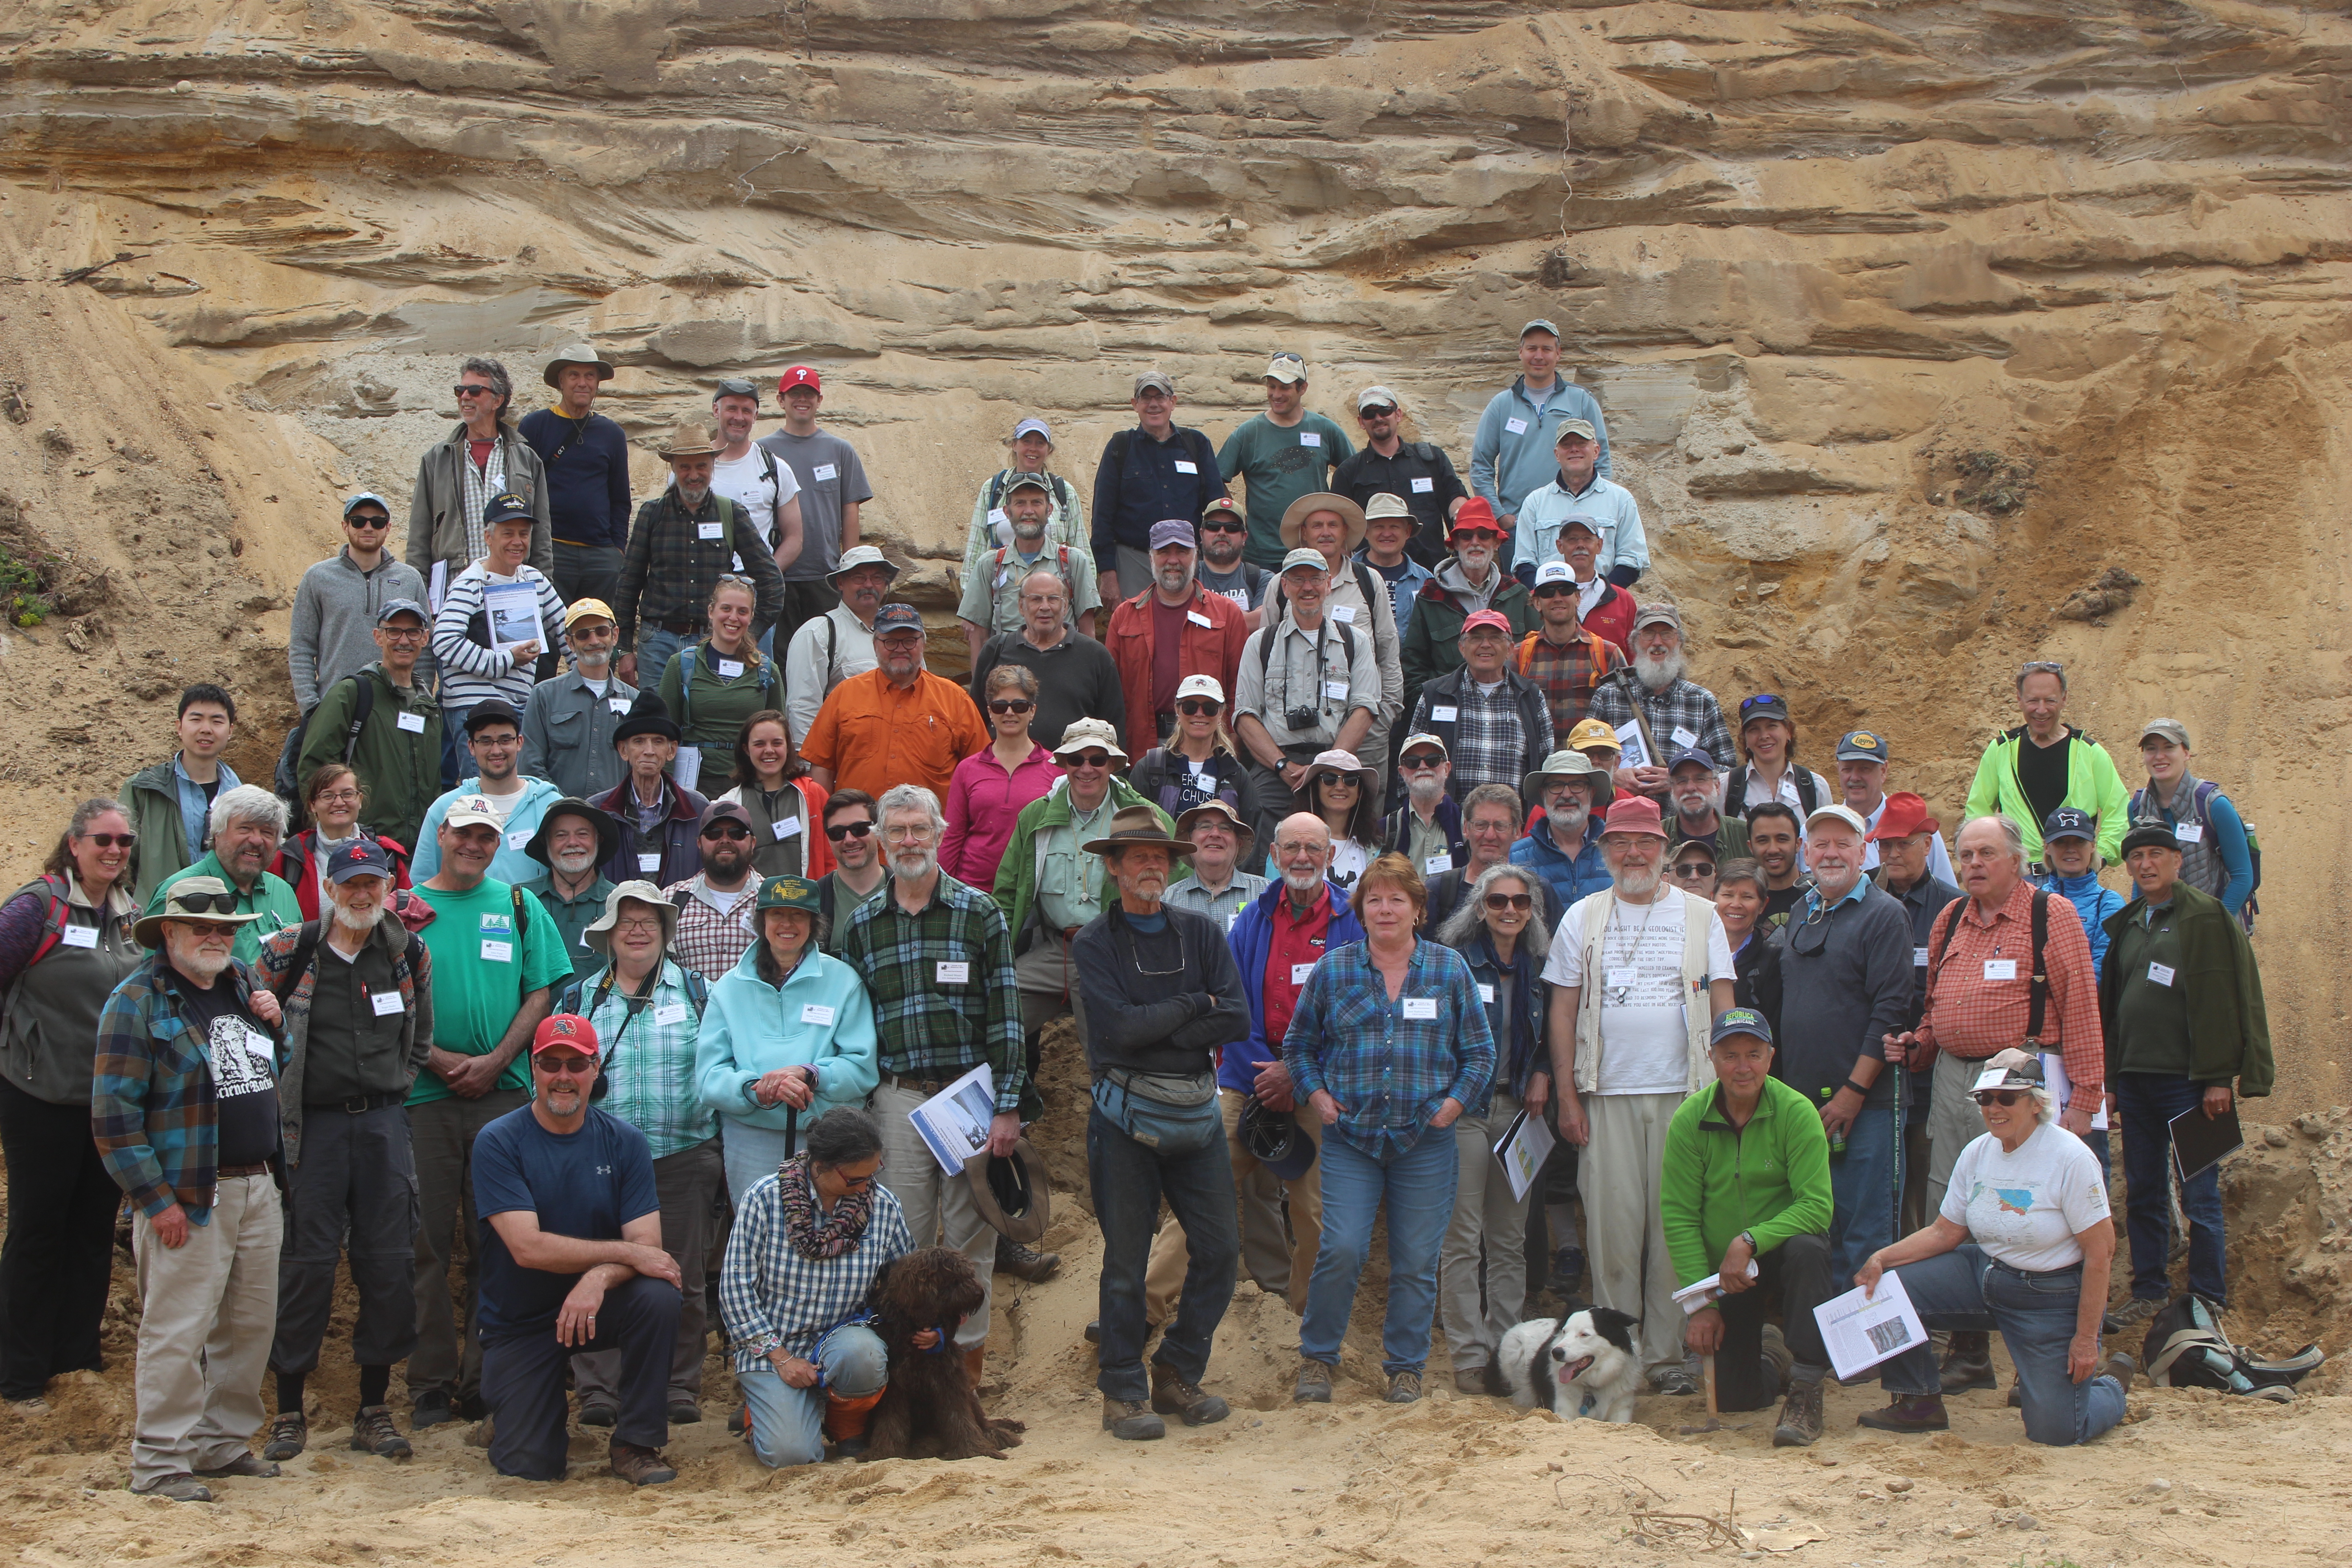 Approximately 85 Friends of the Pleistocene gathered in the gravel pit in the Eastham plain deposits (Stop 11), lower Cape Cod, June 1, 2019